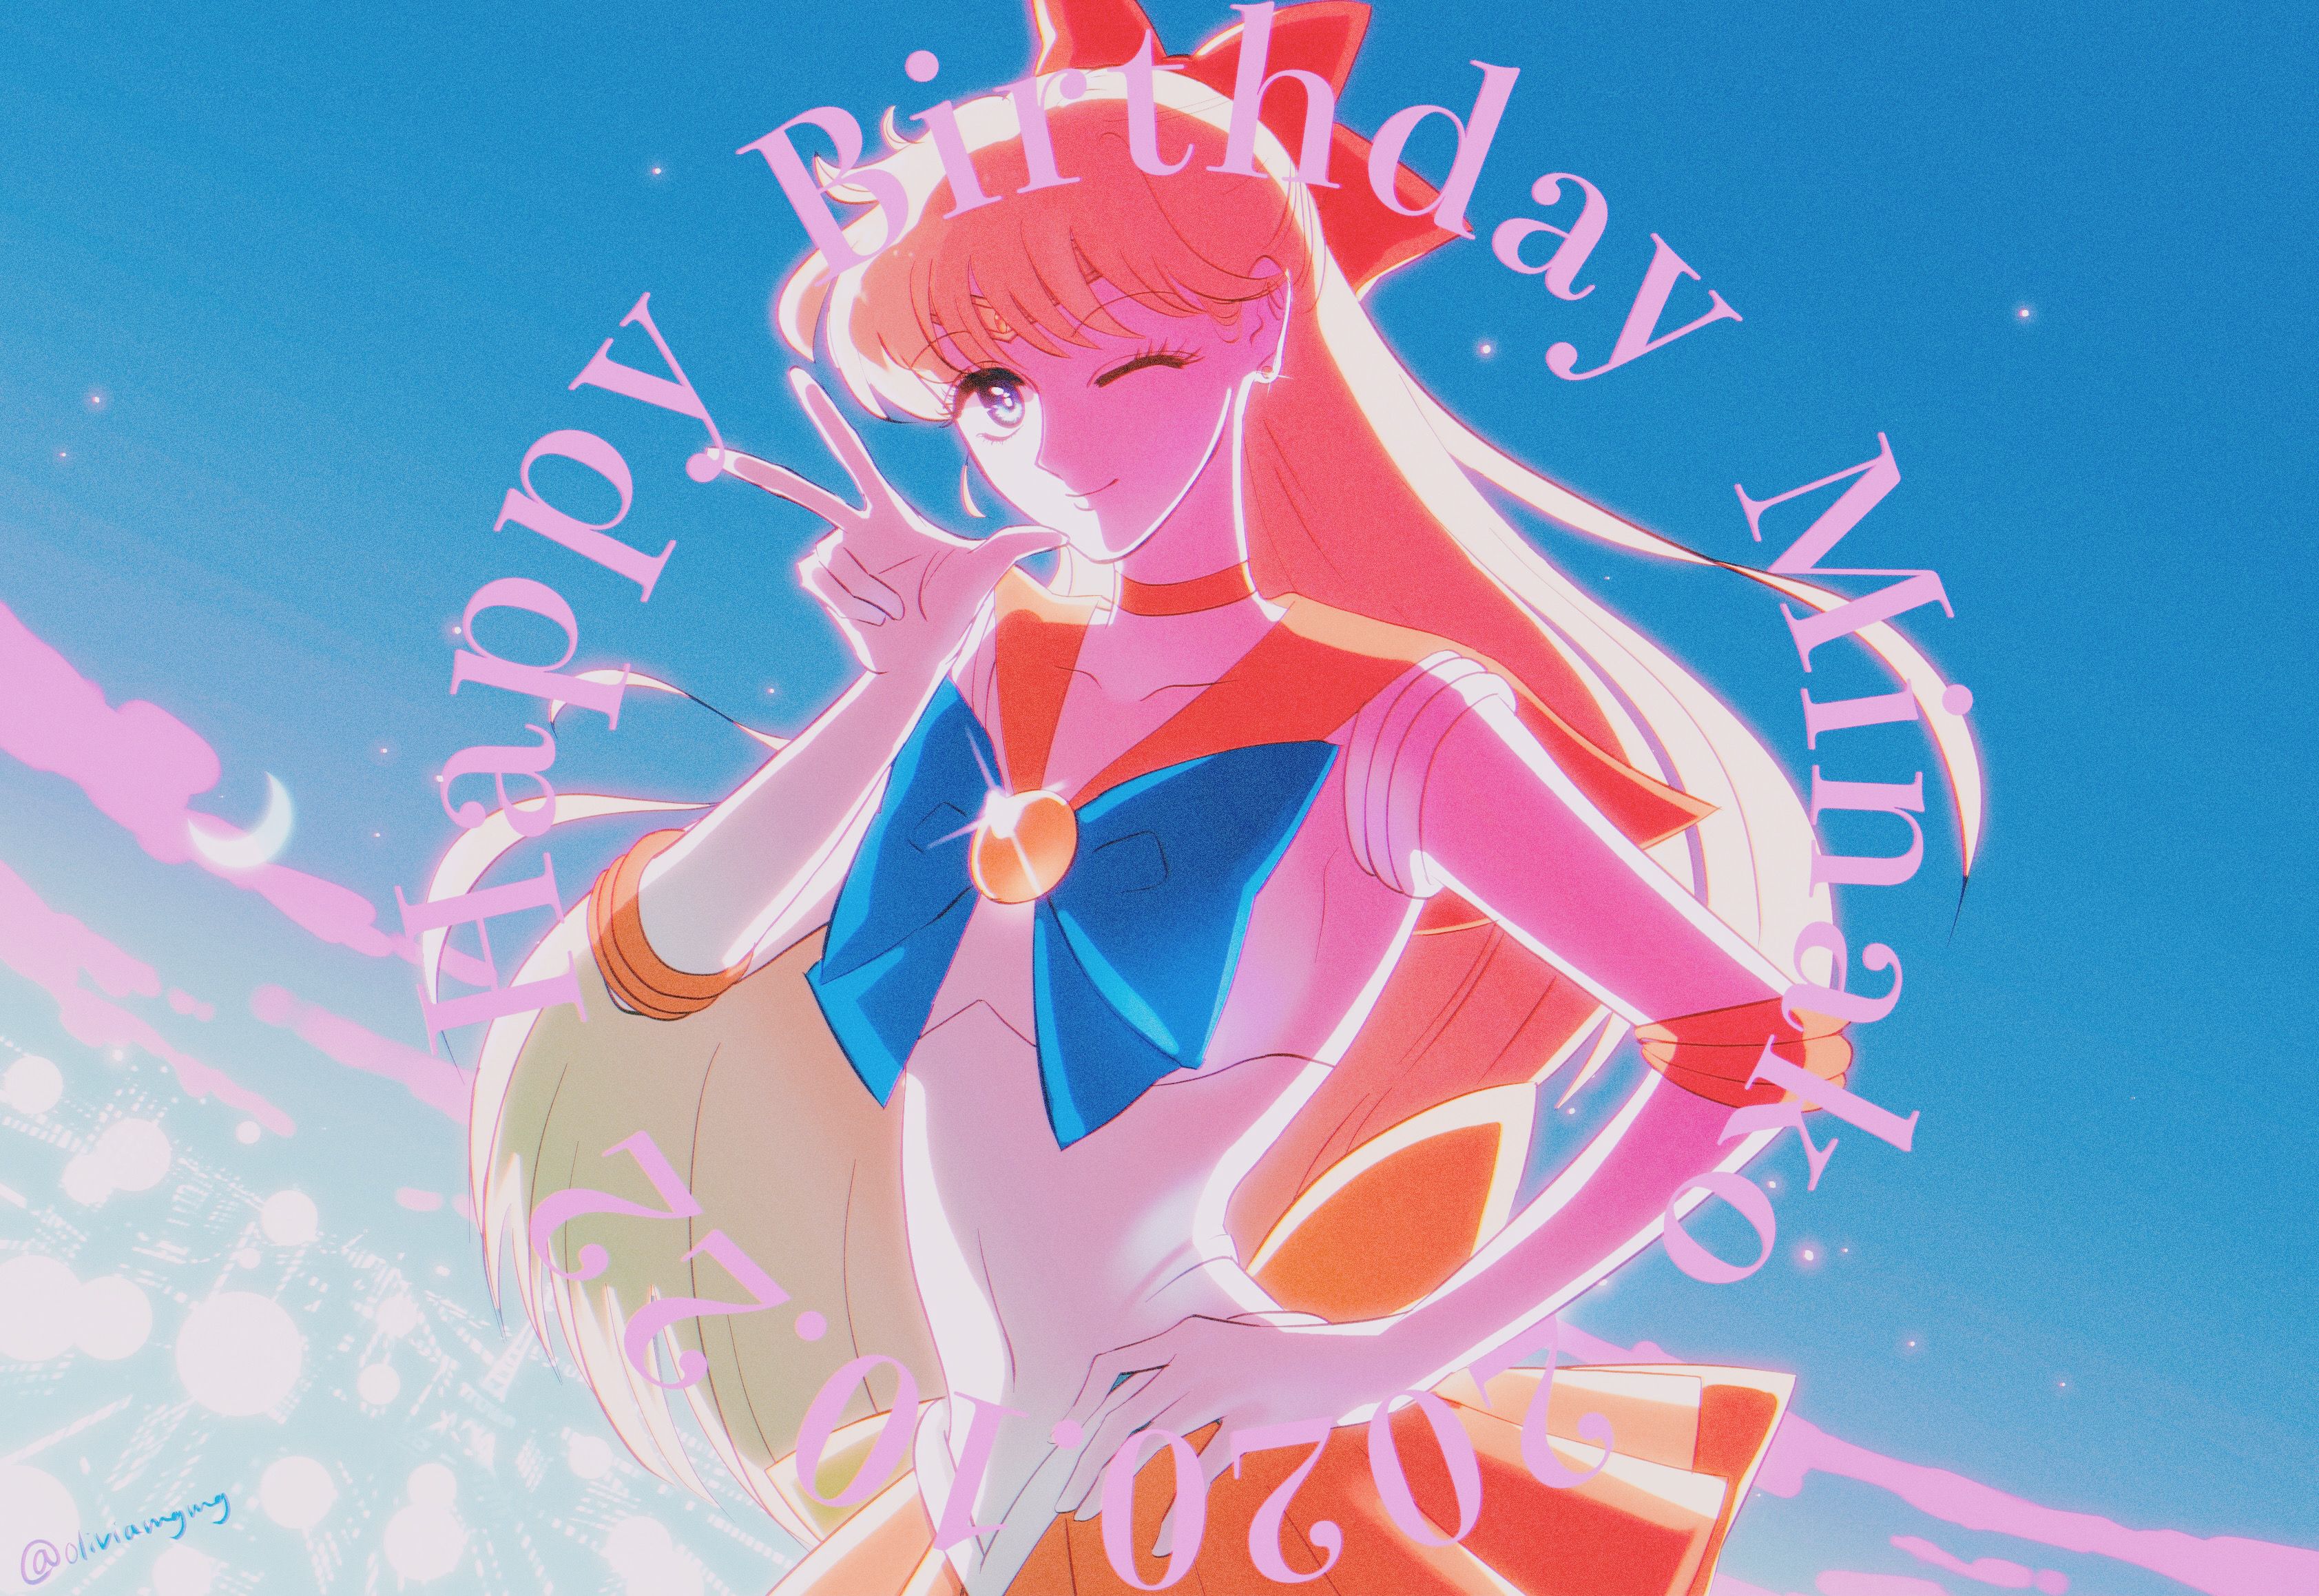 A digital illustration of Sailor Moon from the Sailor Moon series, with the text 